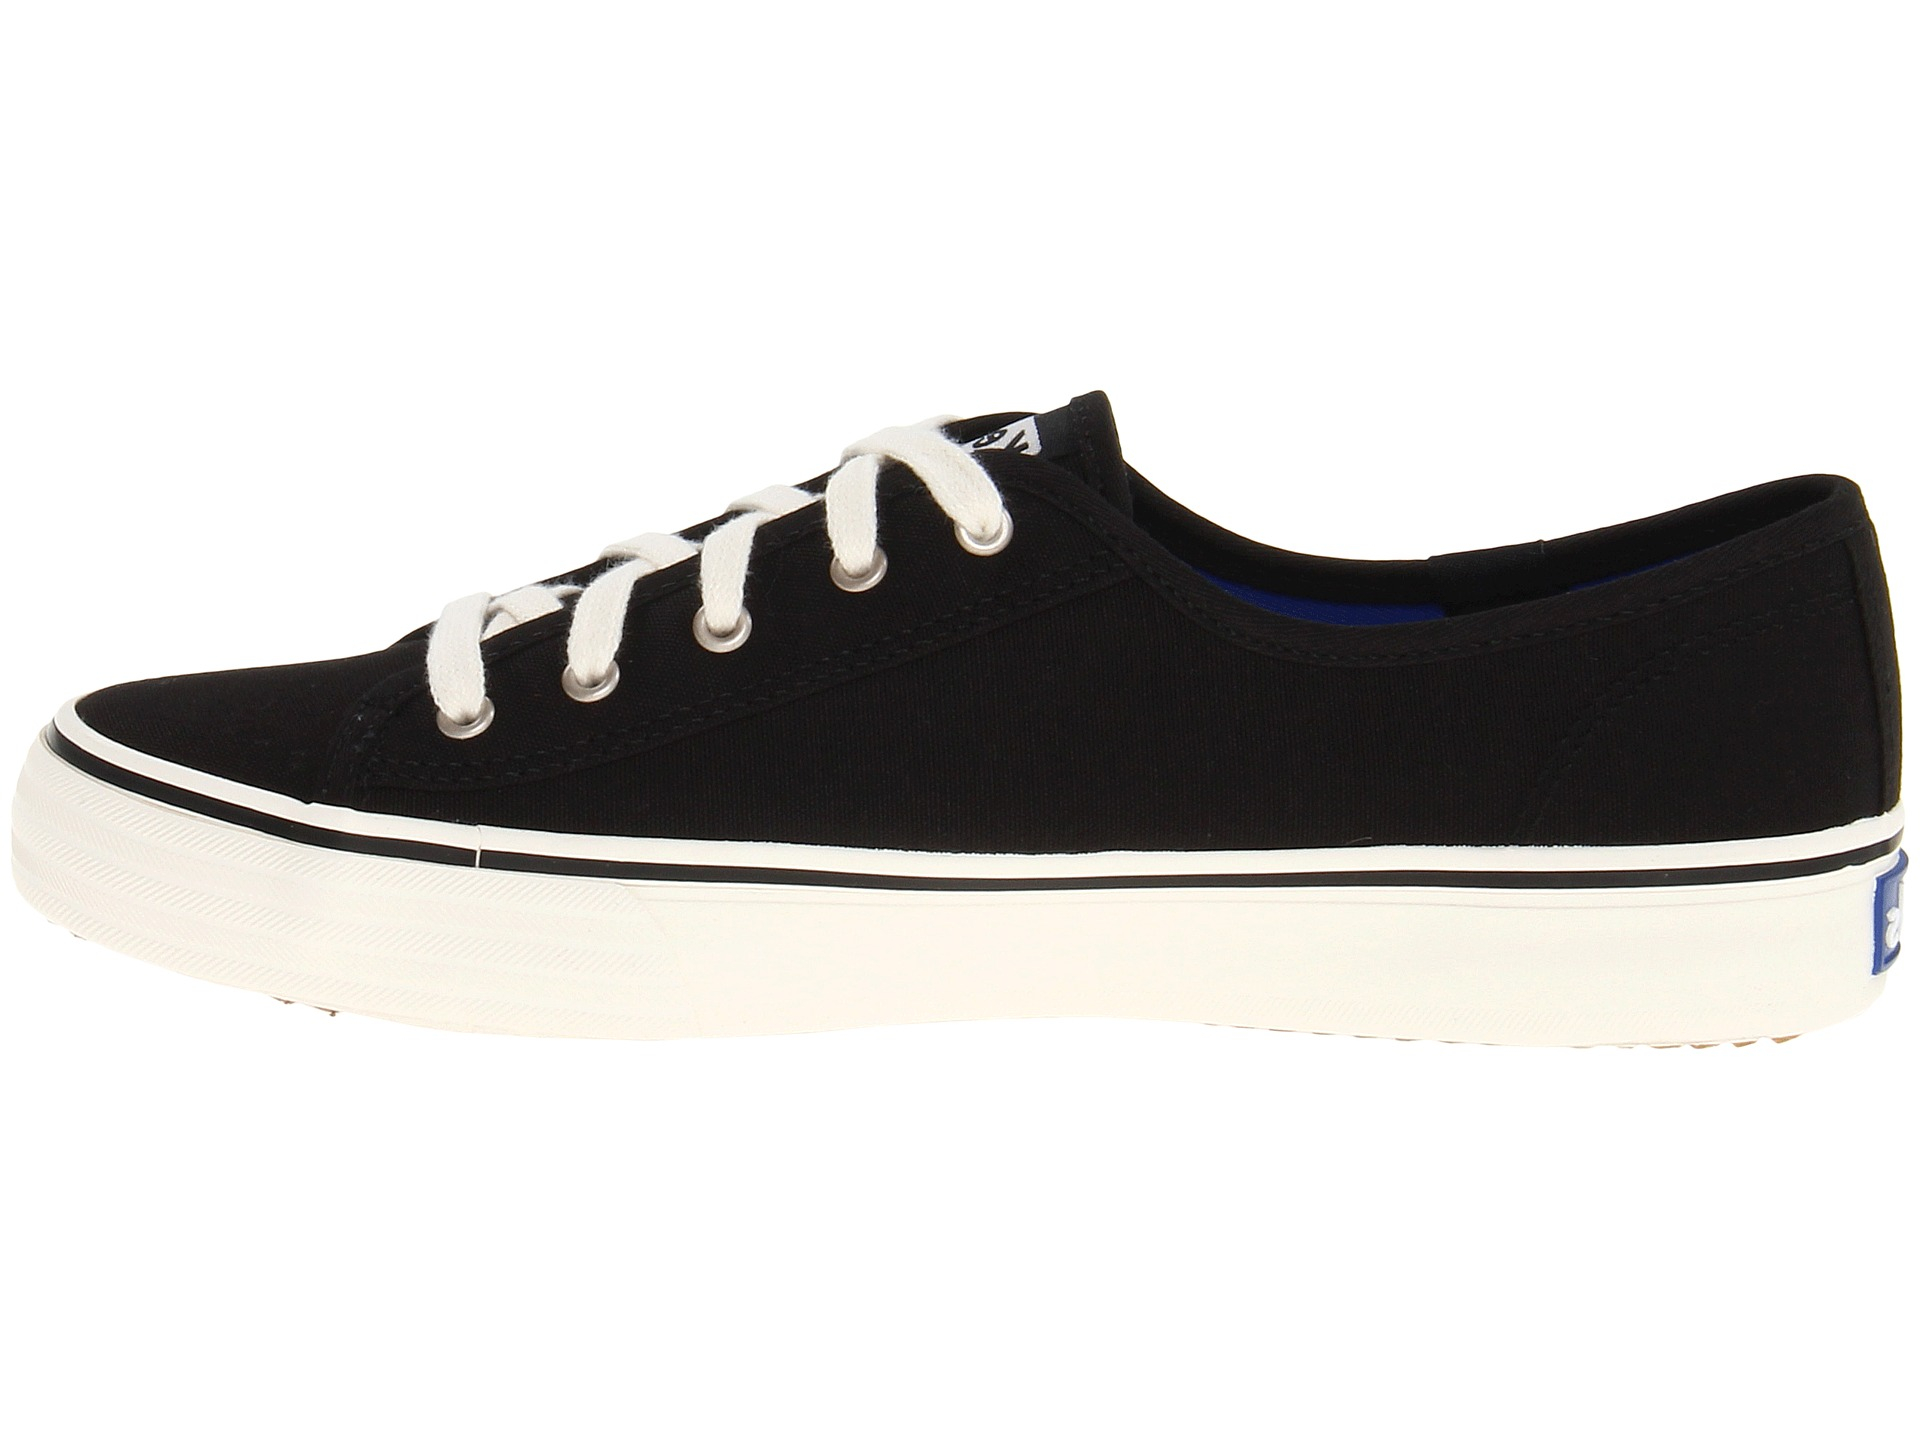 Lyst - Keds Double Up Core in Black